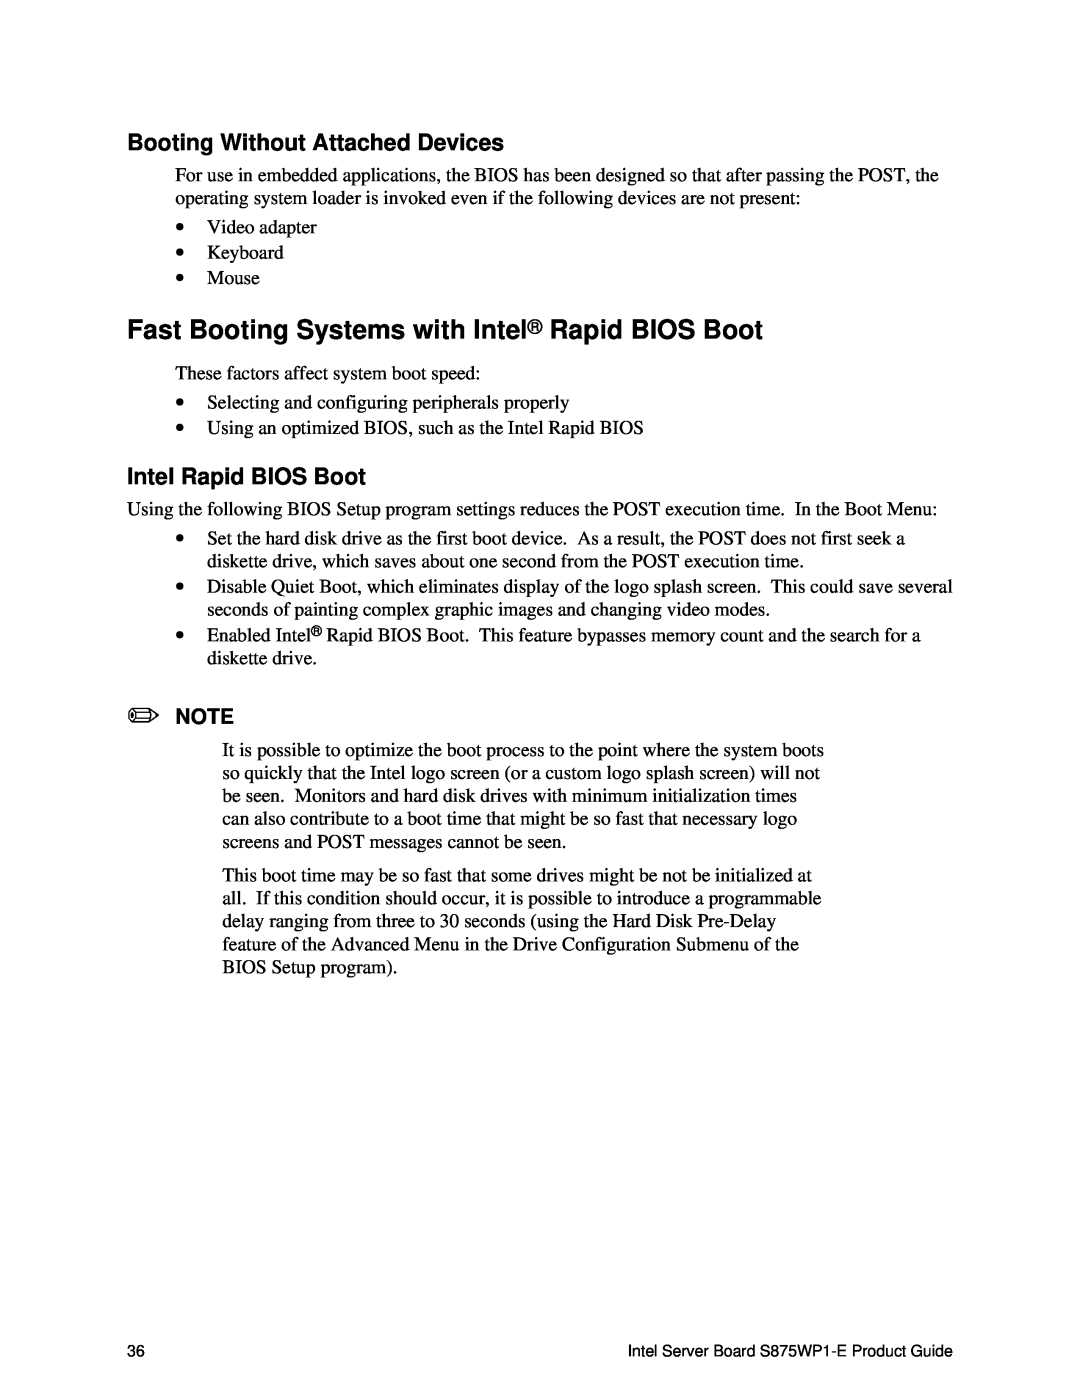 Intel S875WP1-E manual Fast Booting Systems with Intel Rapid BIOS Boot, Booting Without Attached Devices 